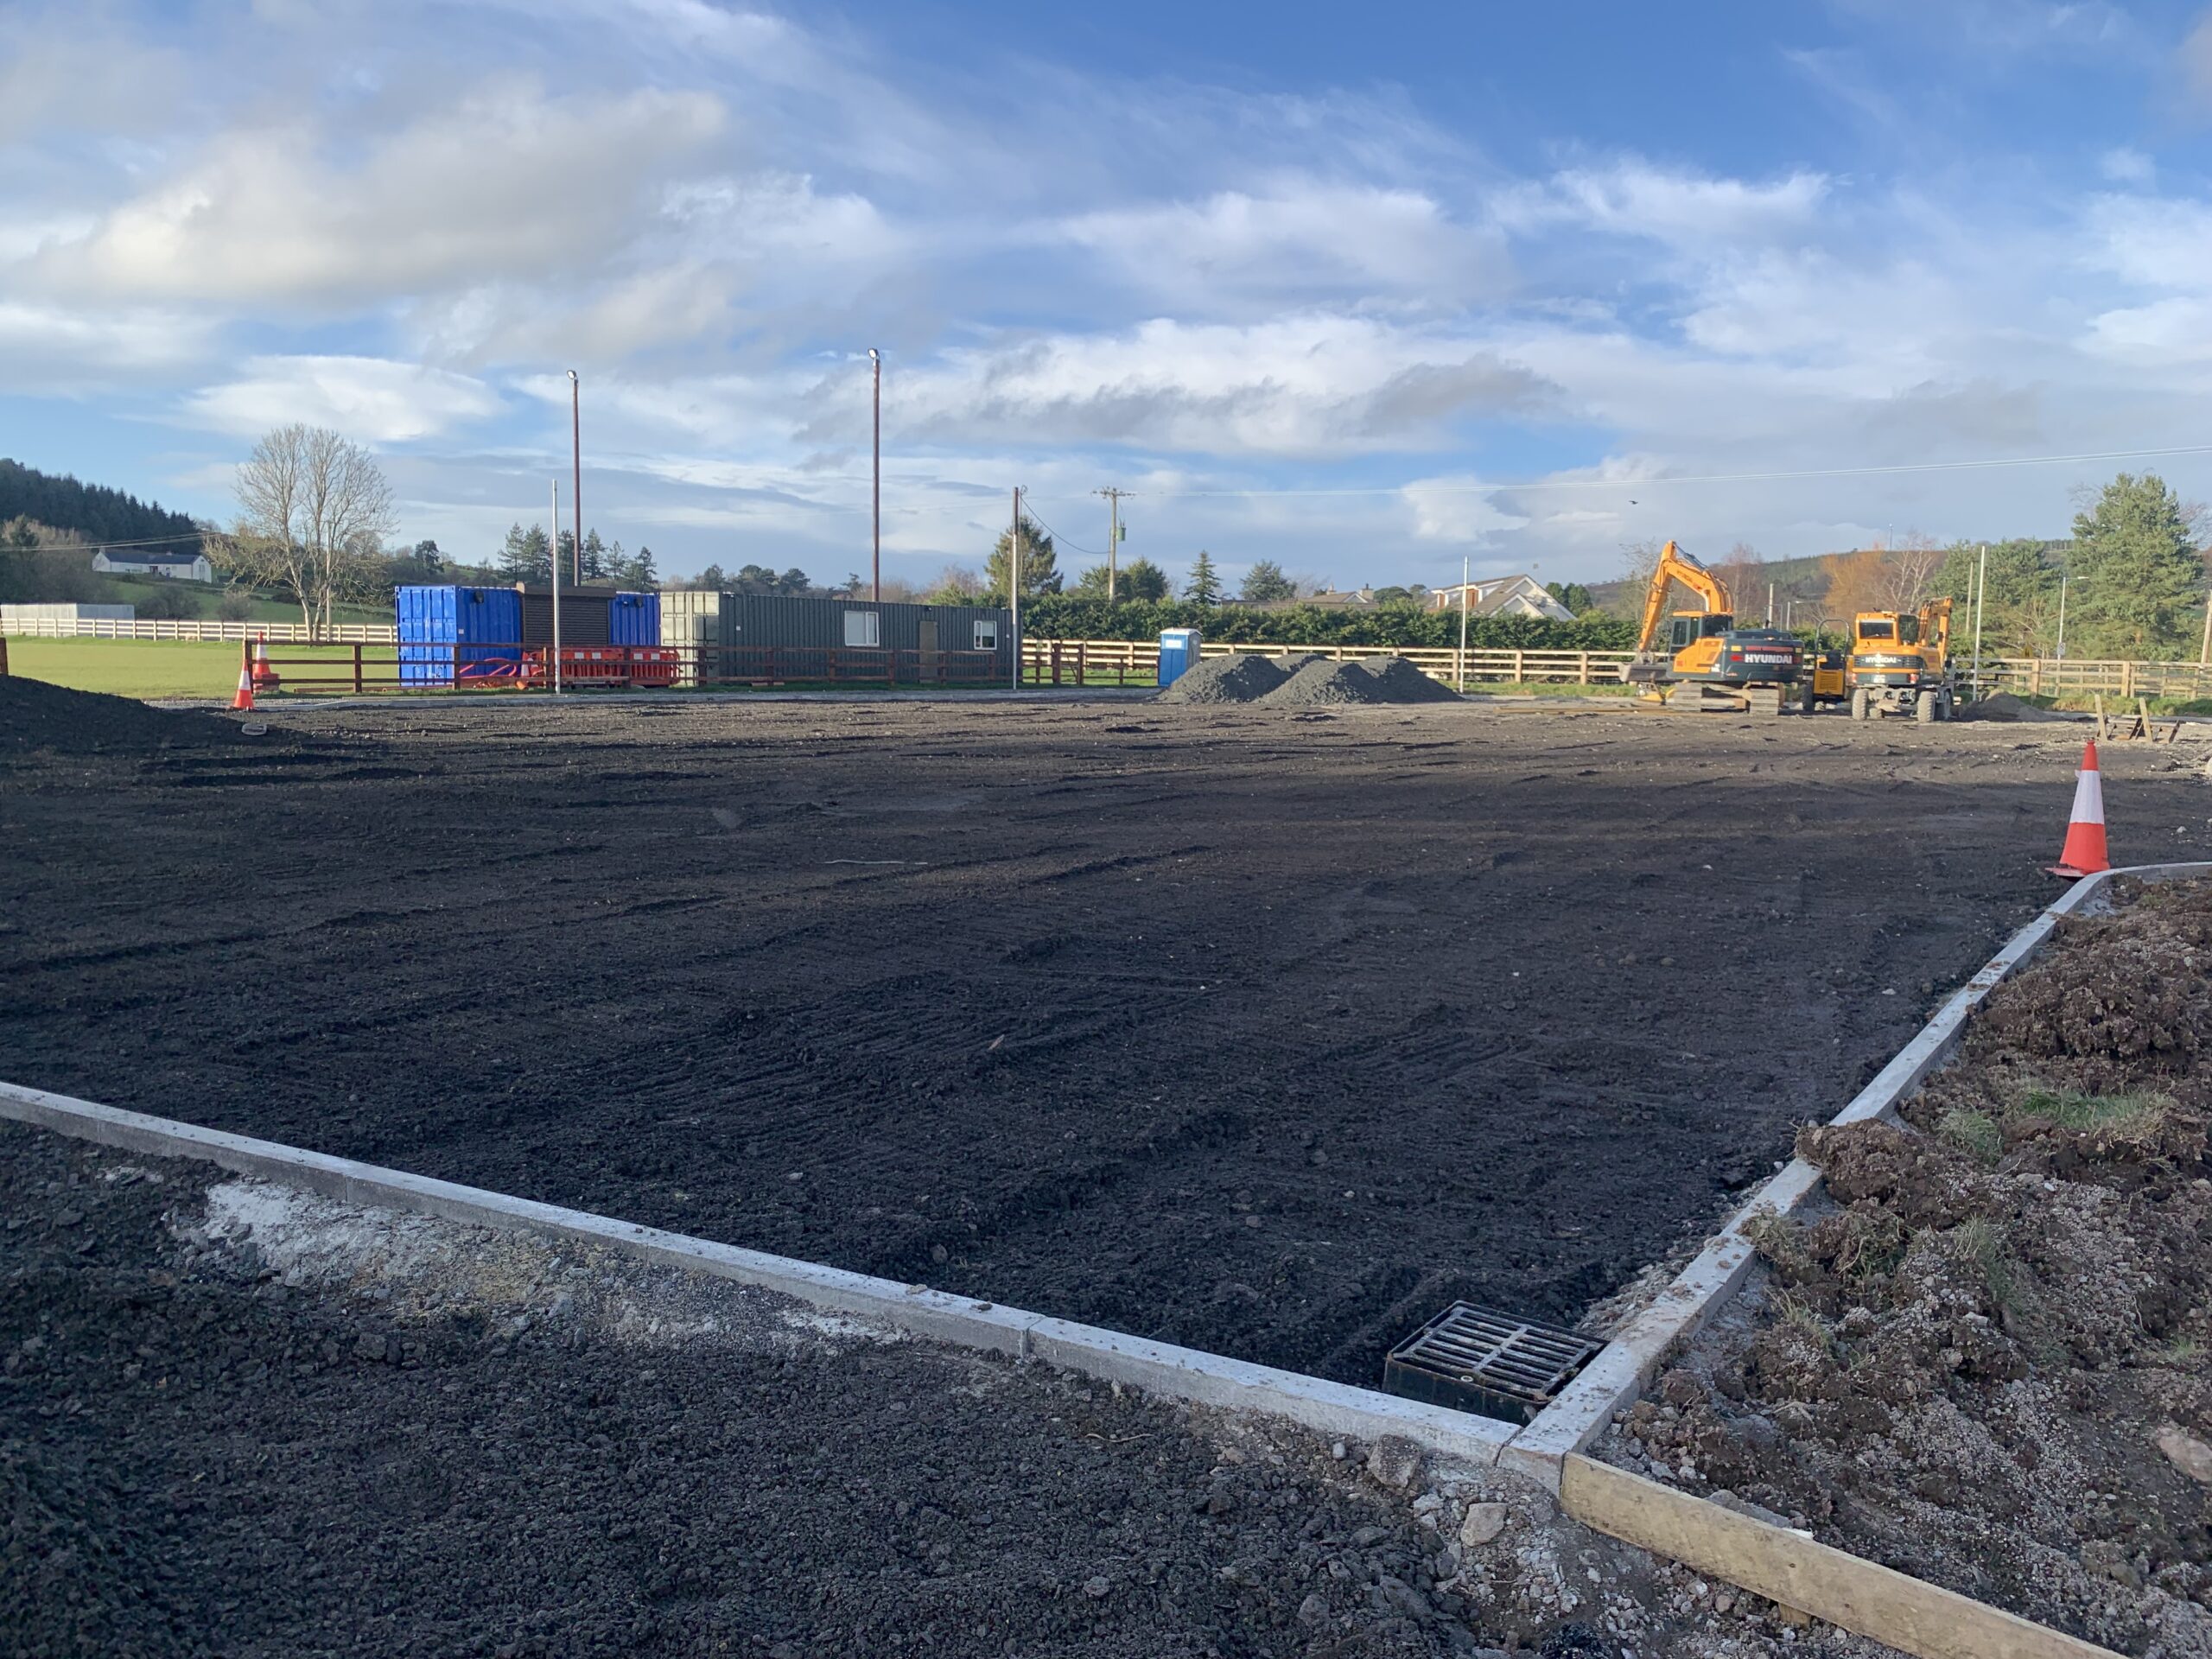 Car Park Project works in pictures...Shout out to Alan Darcy and co who have been flat out the past couple of weeks in awful conditions, great work